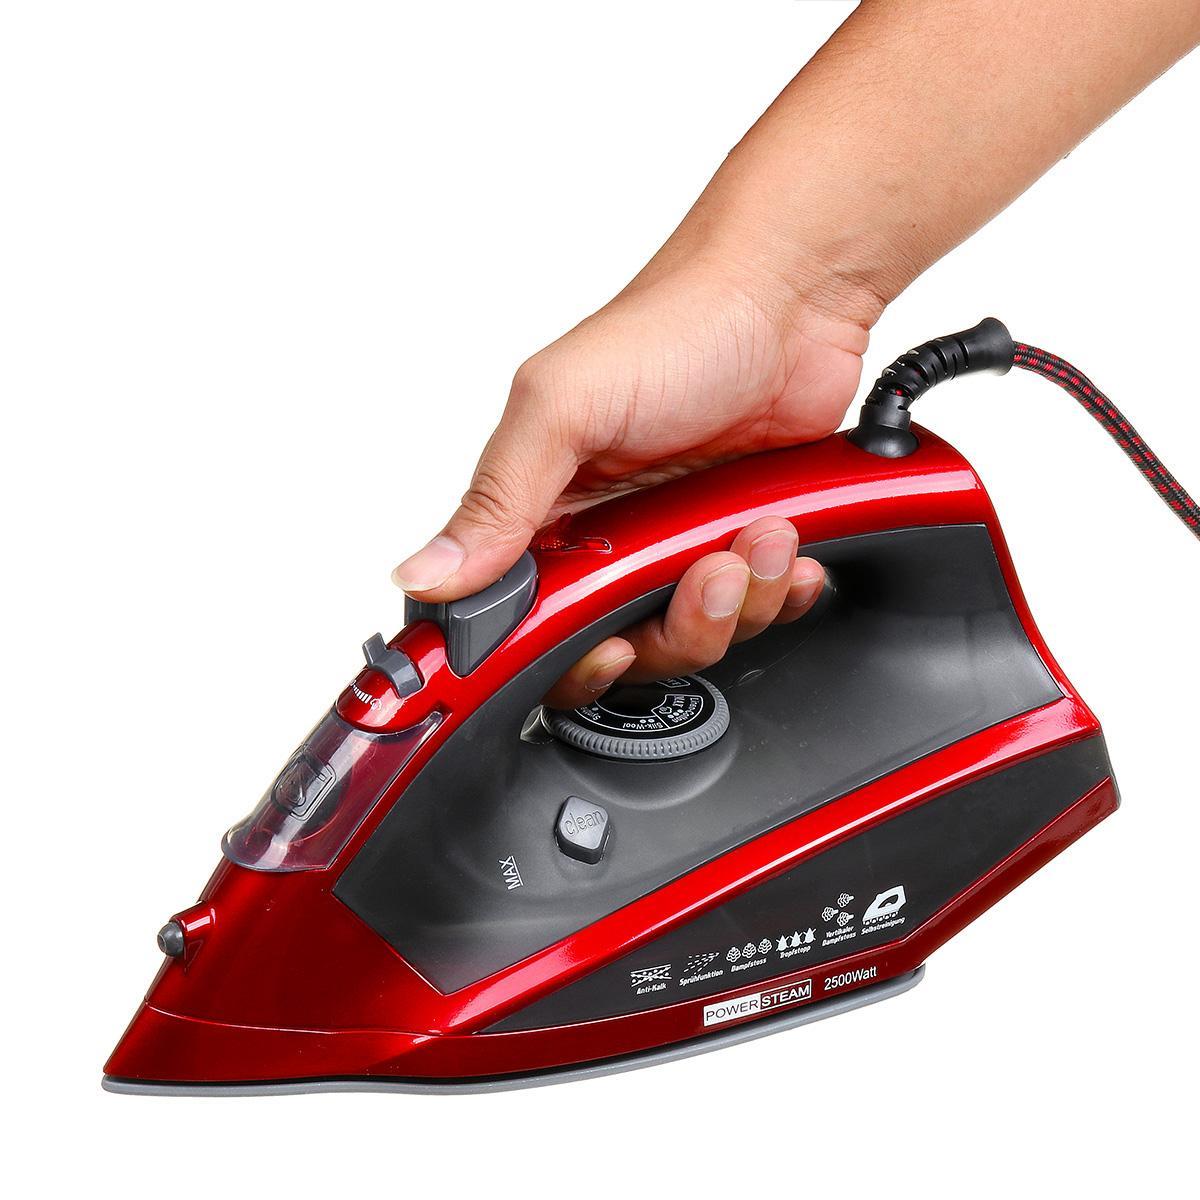 220-240V 2500W Electric Steam Iron for Travel Home Garment Steam Generator 4 Speed Clothes Ironing Steamer Coated Plate